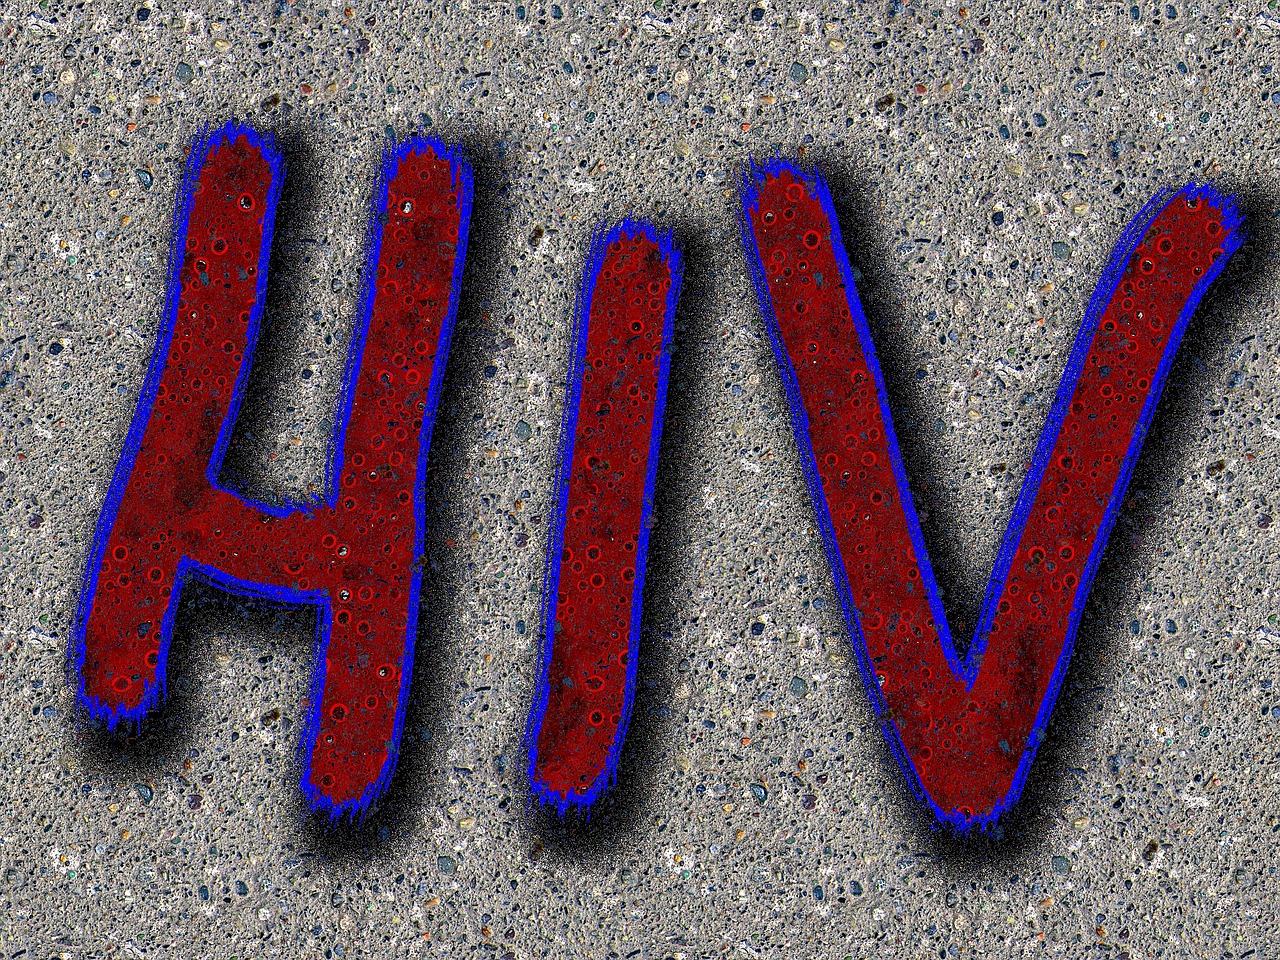 2021 BHIVA指南：<font color="red">HIV</font>-2的管理